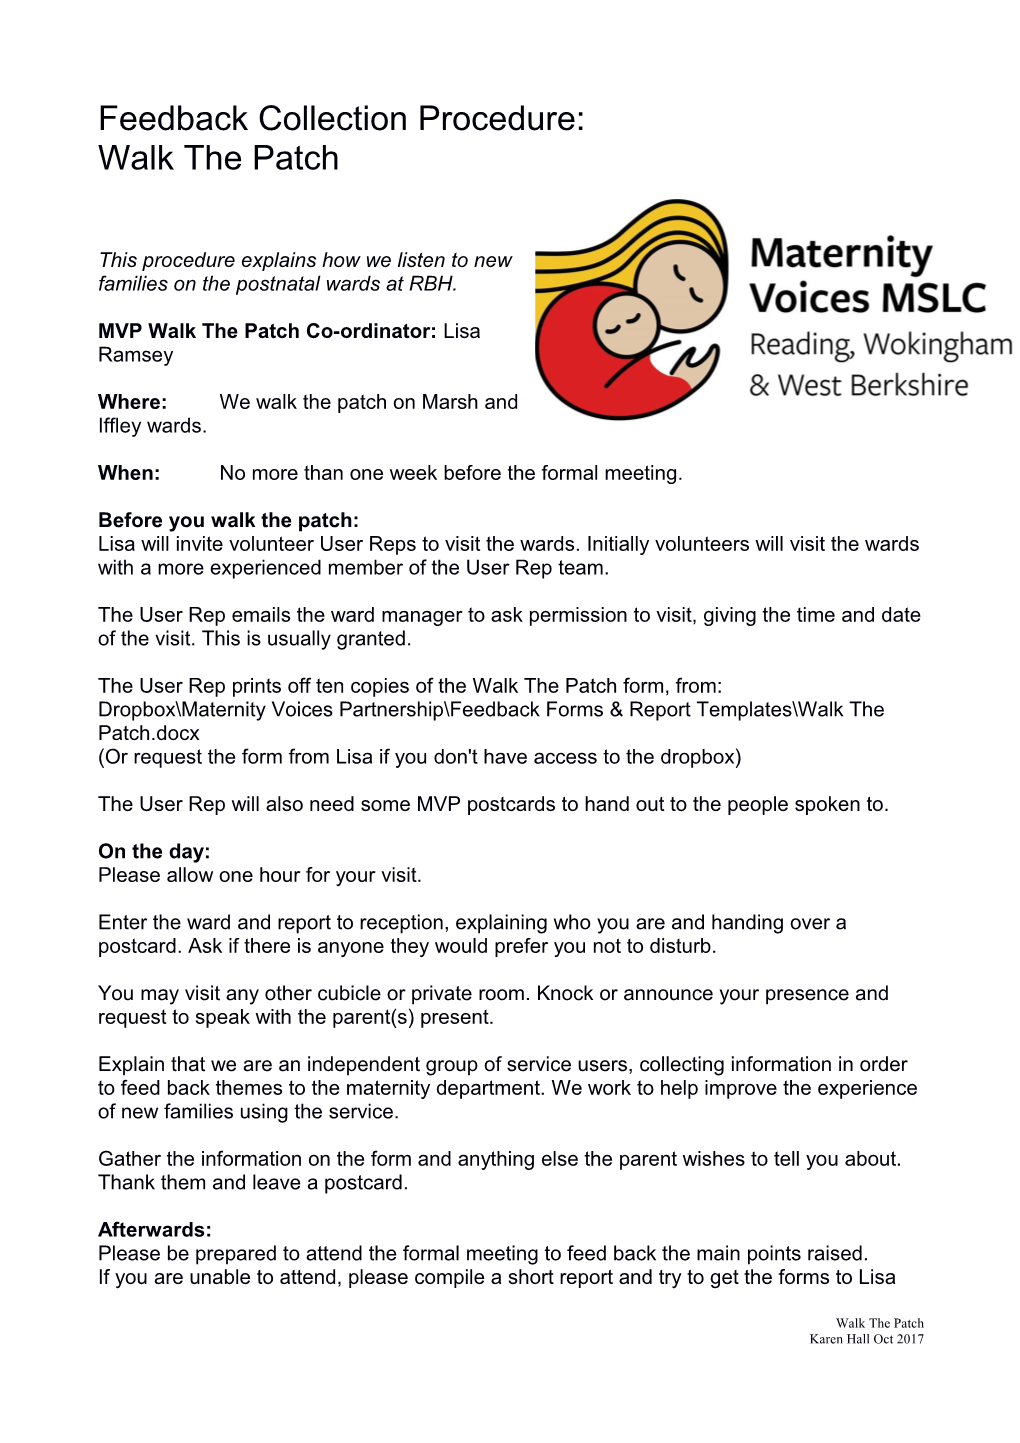 This Procedure Explains How We Listen to New Families on the Postnatal Wards at RBH